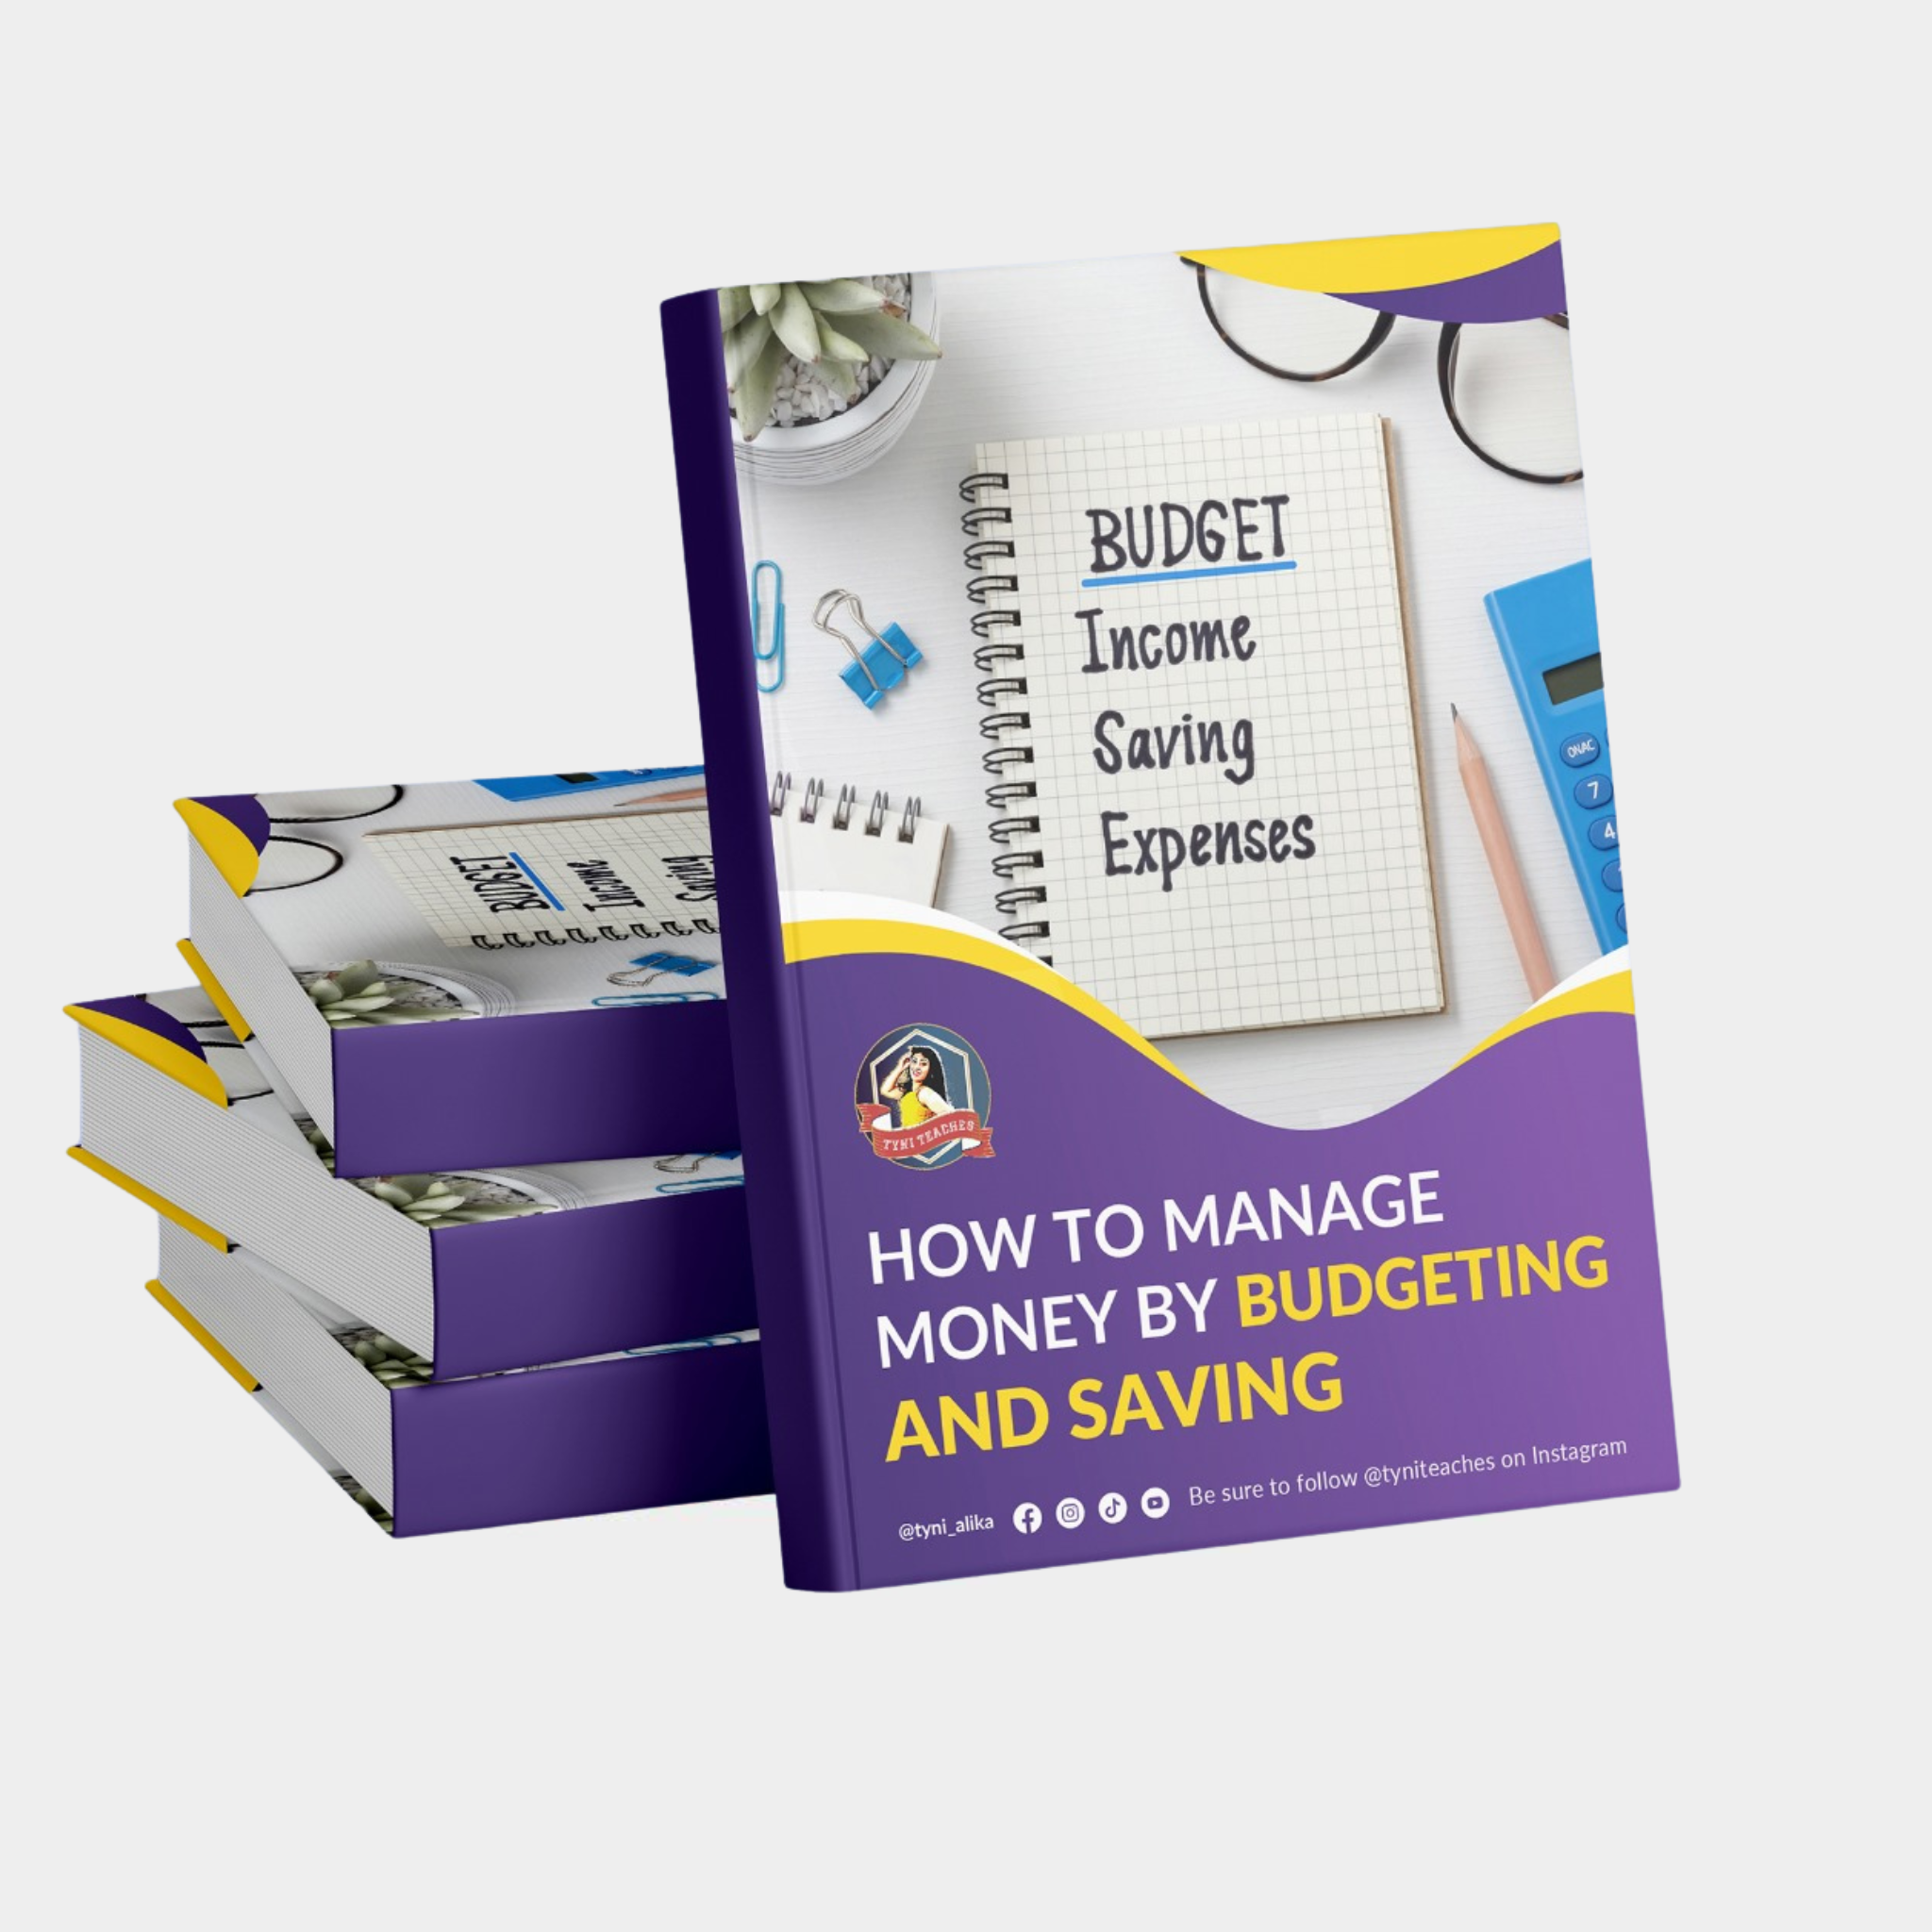 How To Manage Money By Budgeting & Saving